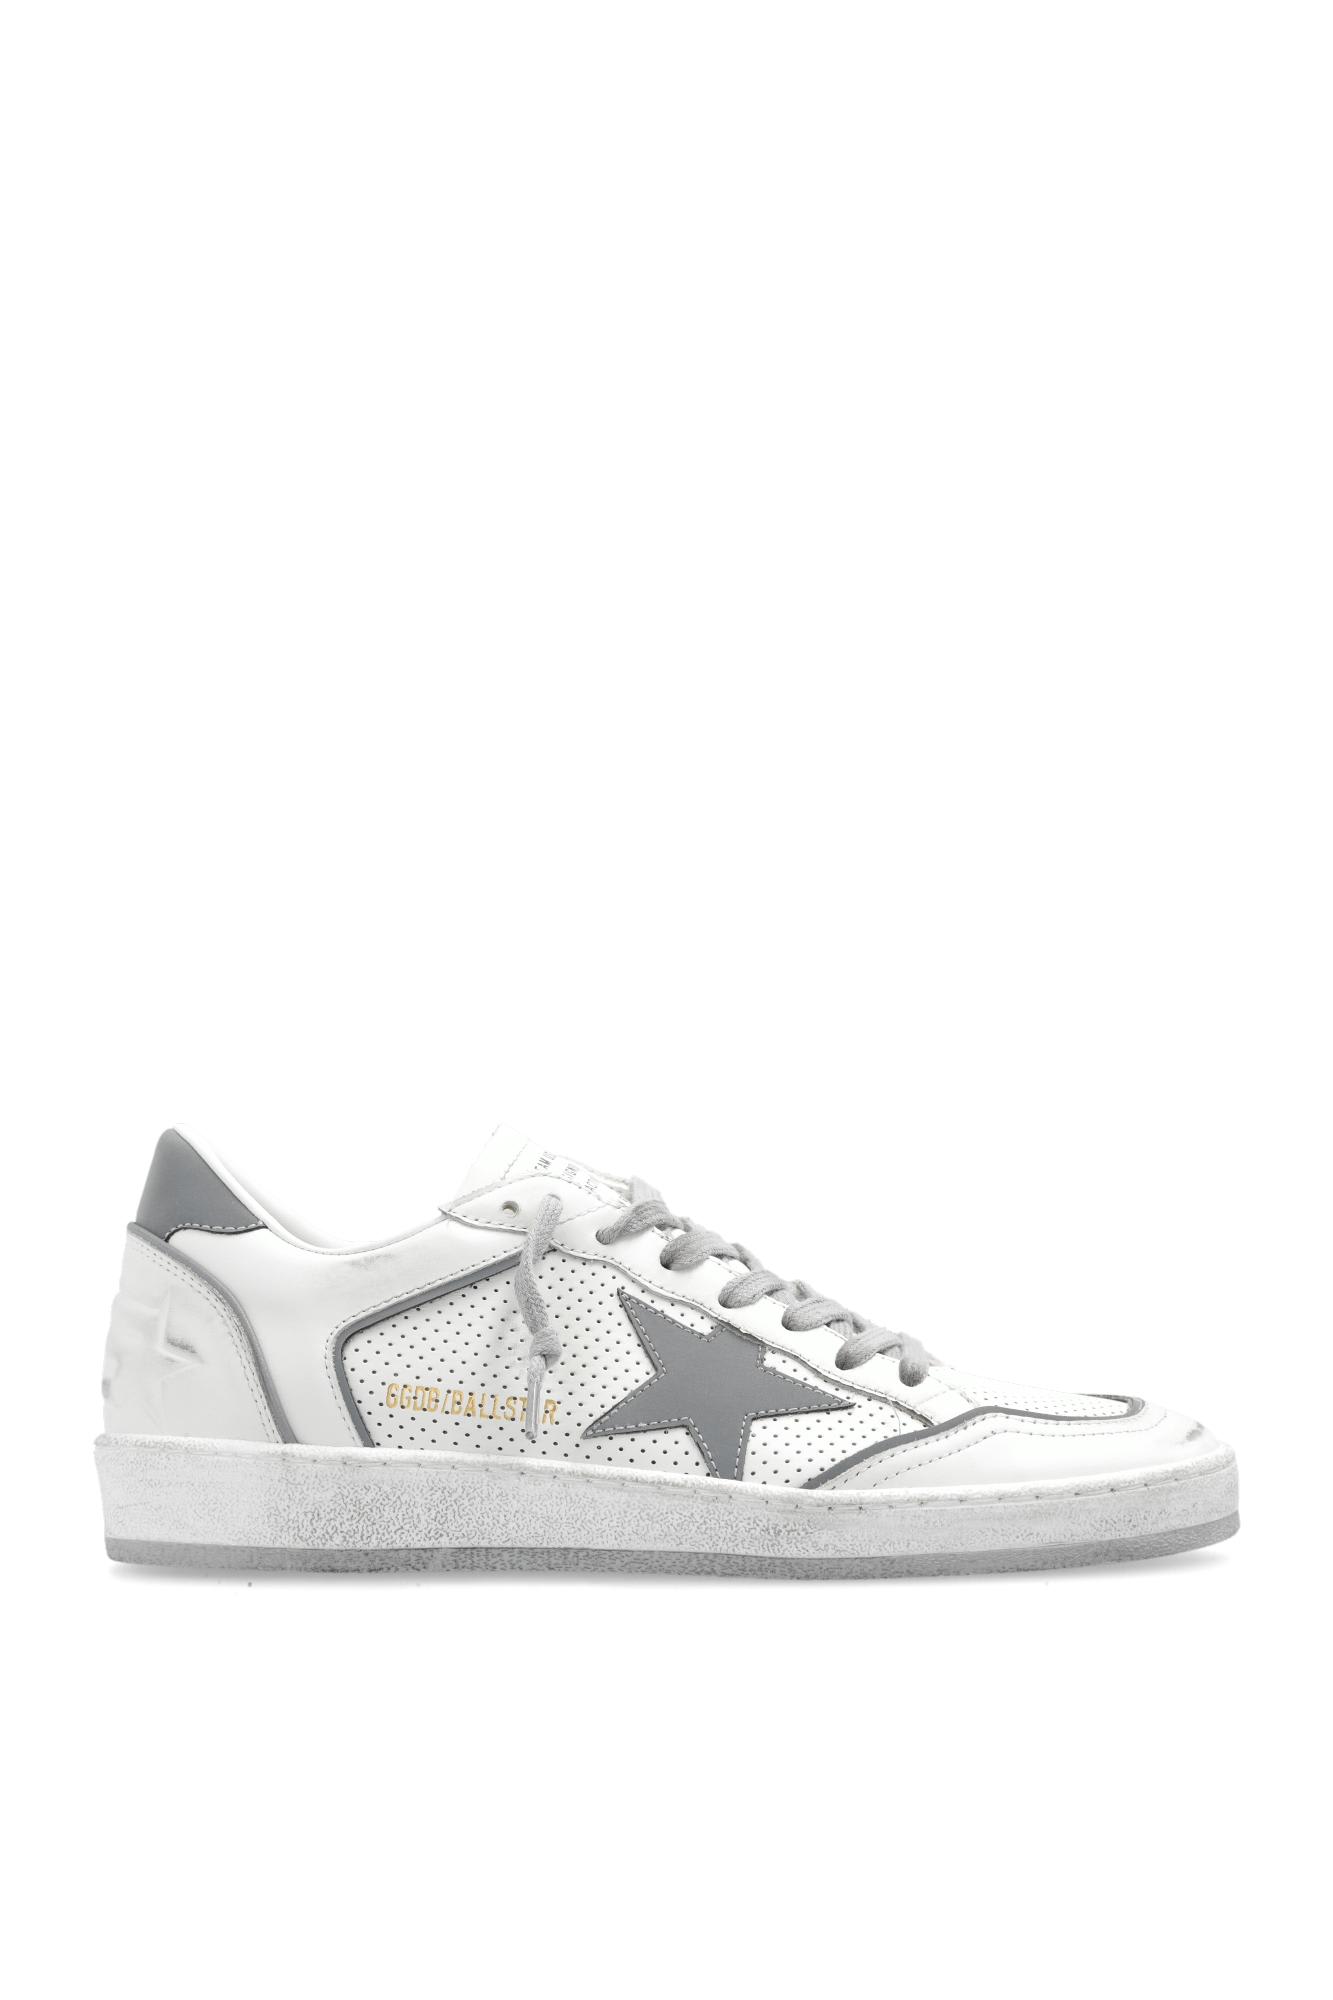 Shop Golden Goose Ball Star Double Quarter Sneakers In White/silver